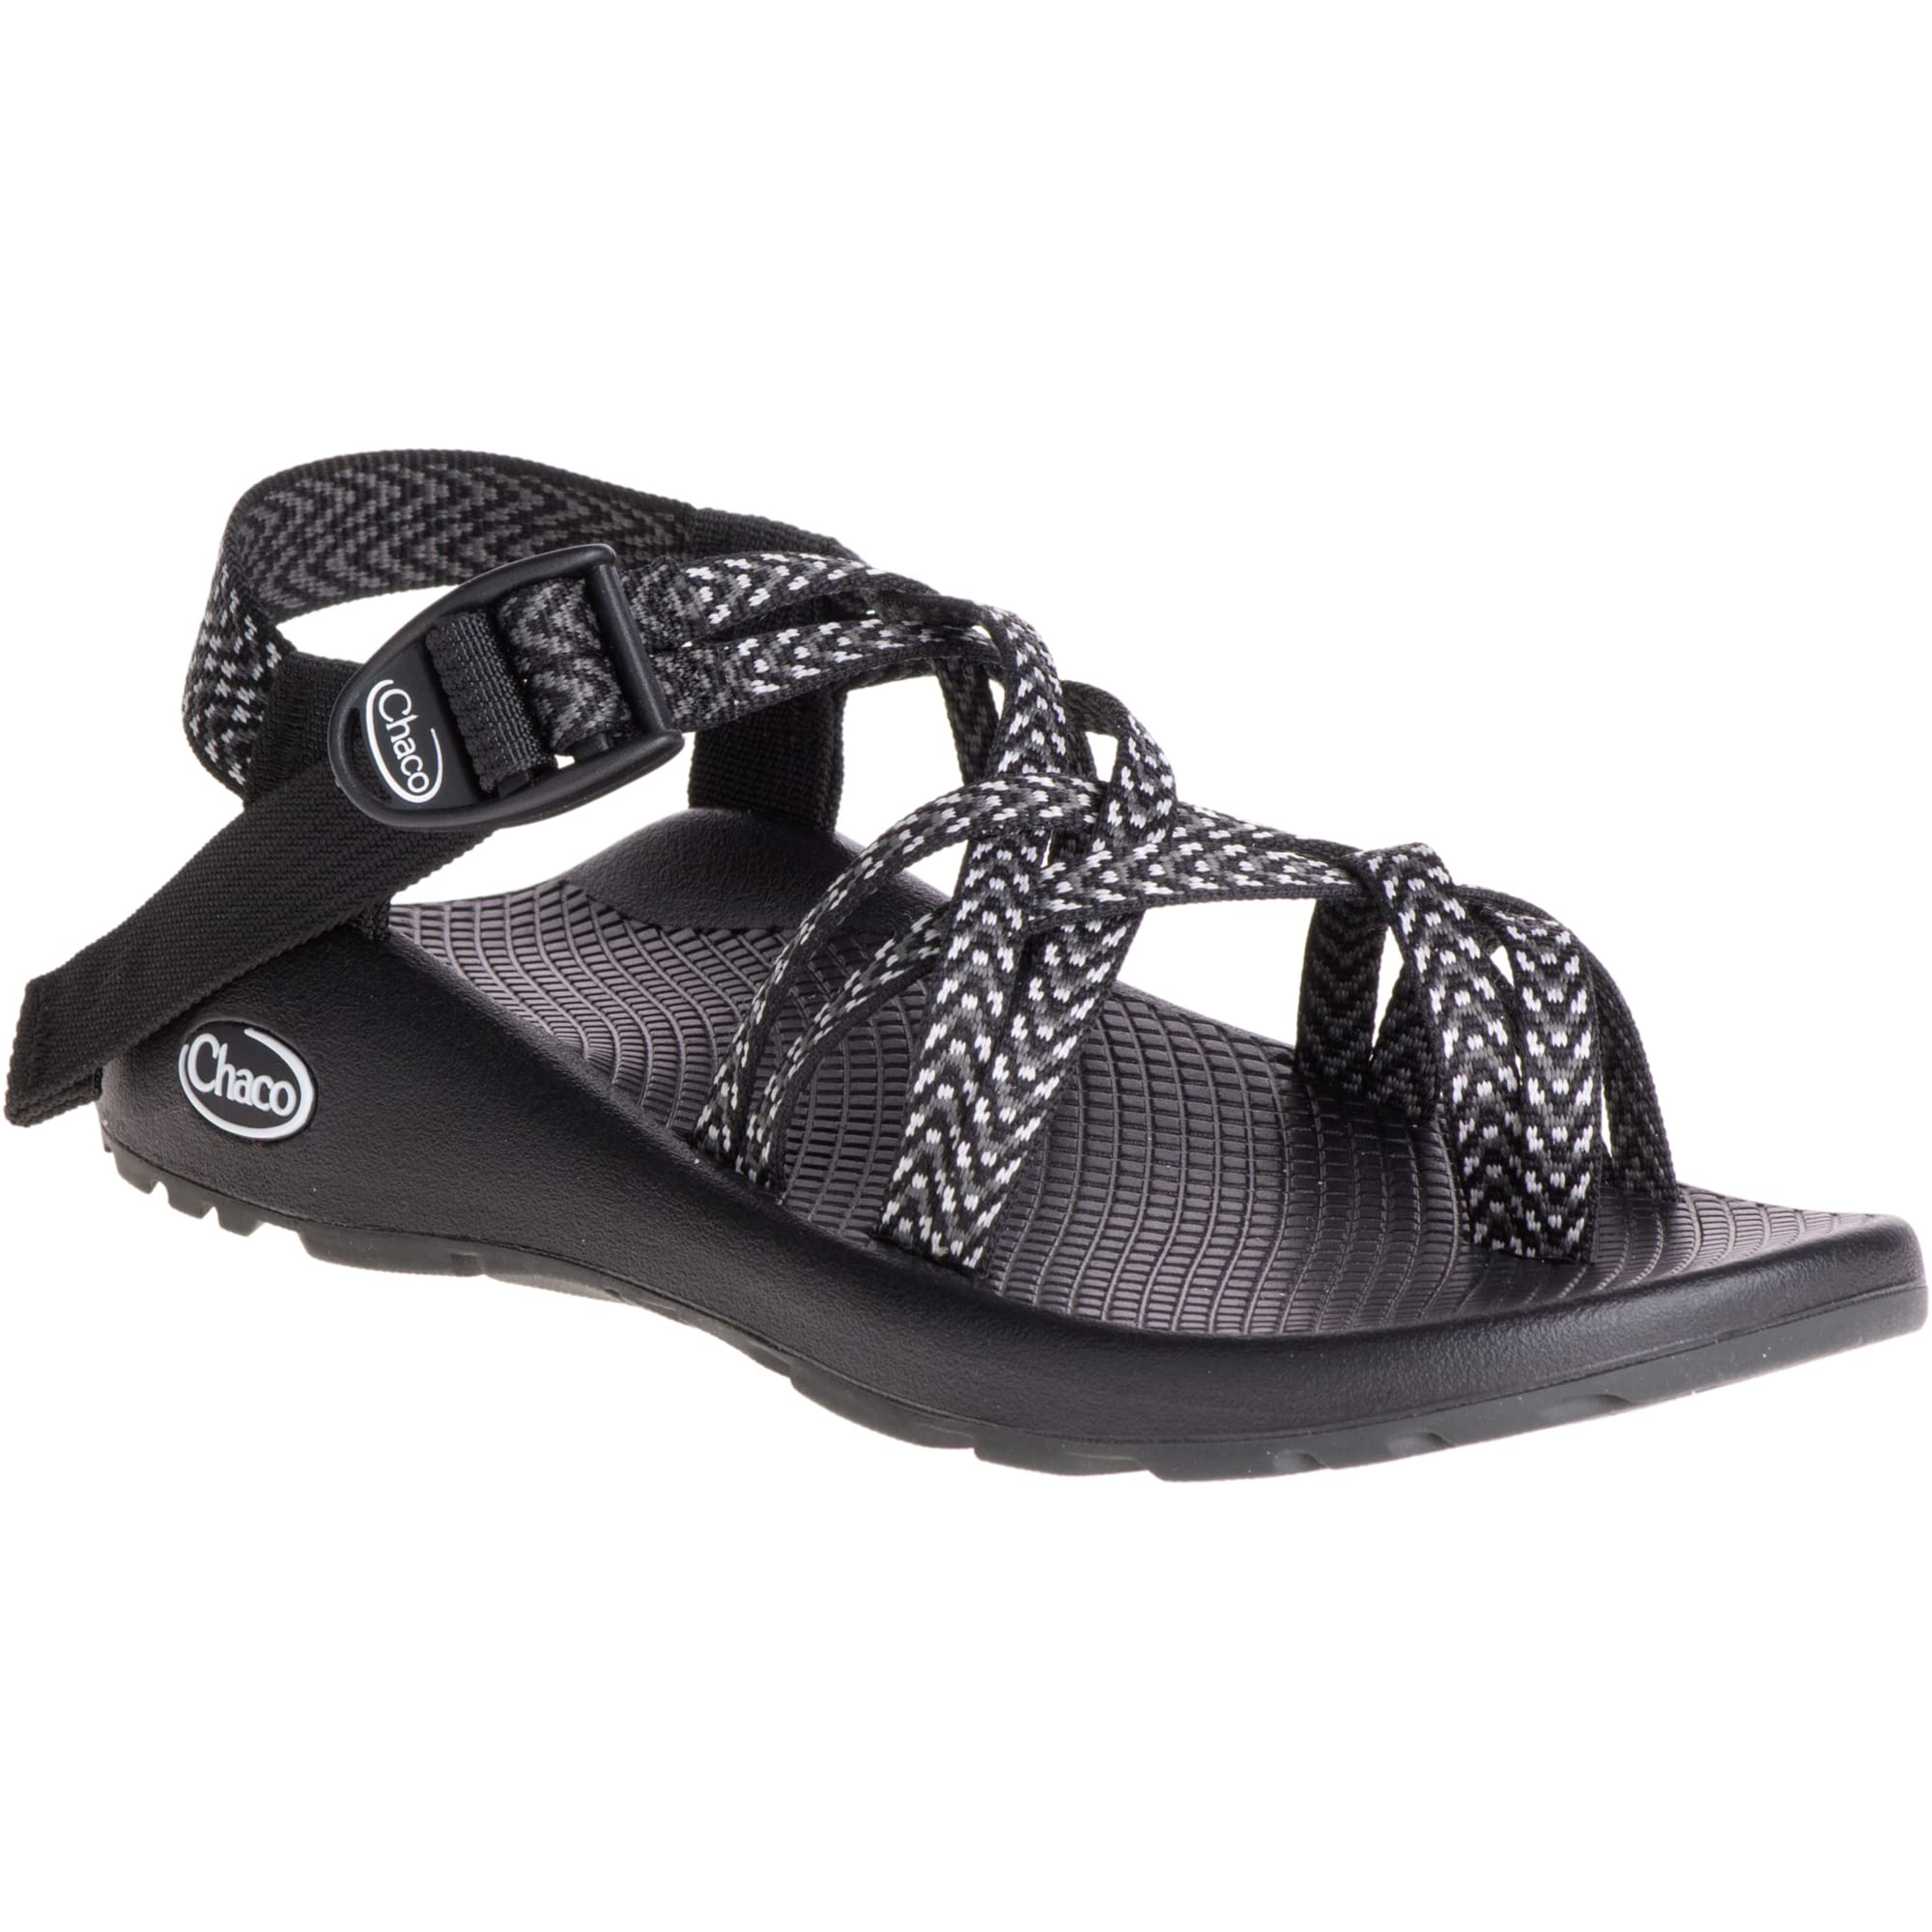 Chaco womens Zx2 Classic Sandal, Boost Black, 10 US